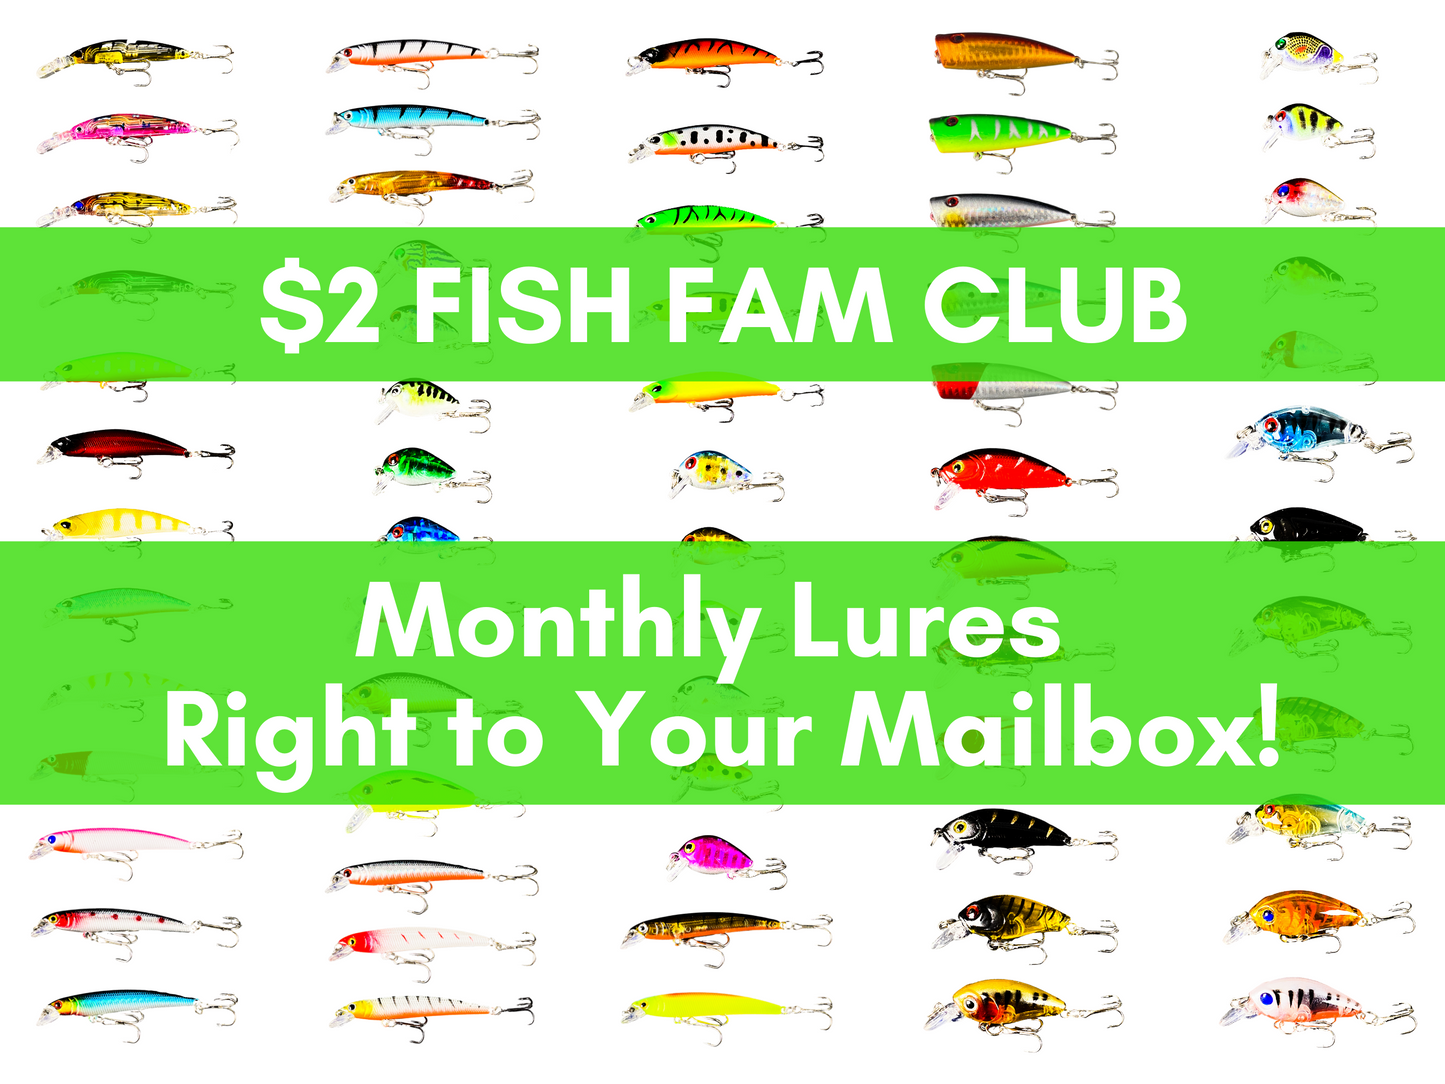 $2 Lure Fish Fam Club - Lures to Your Mailbox